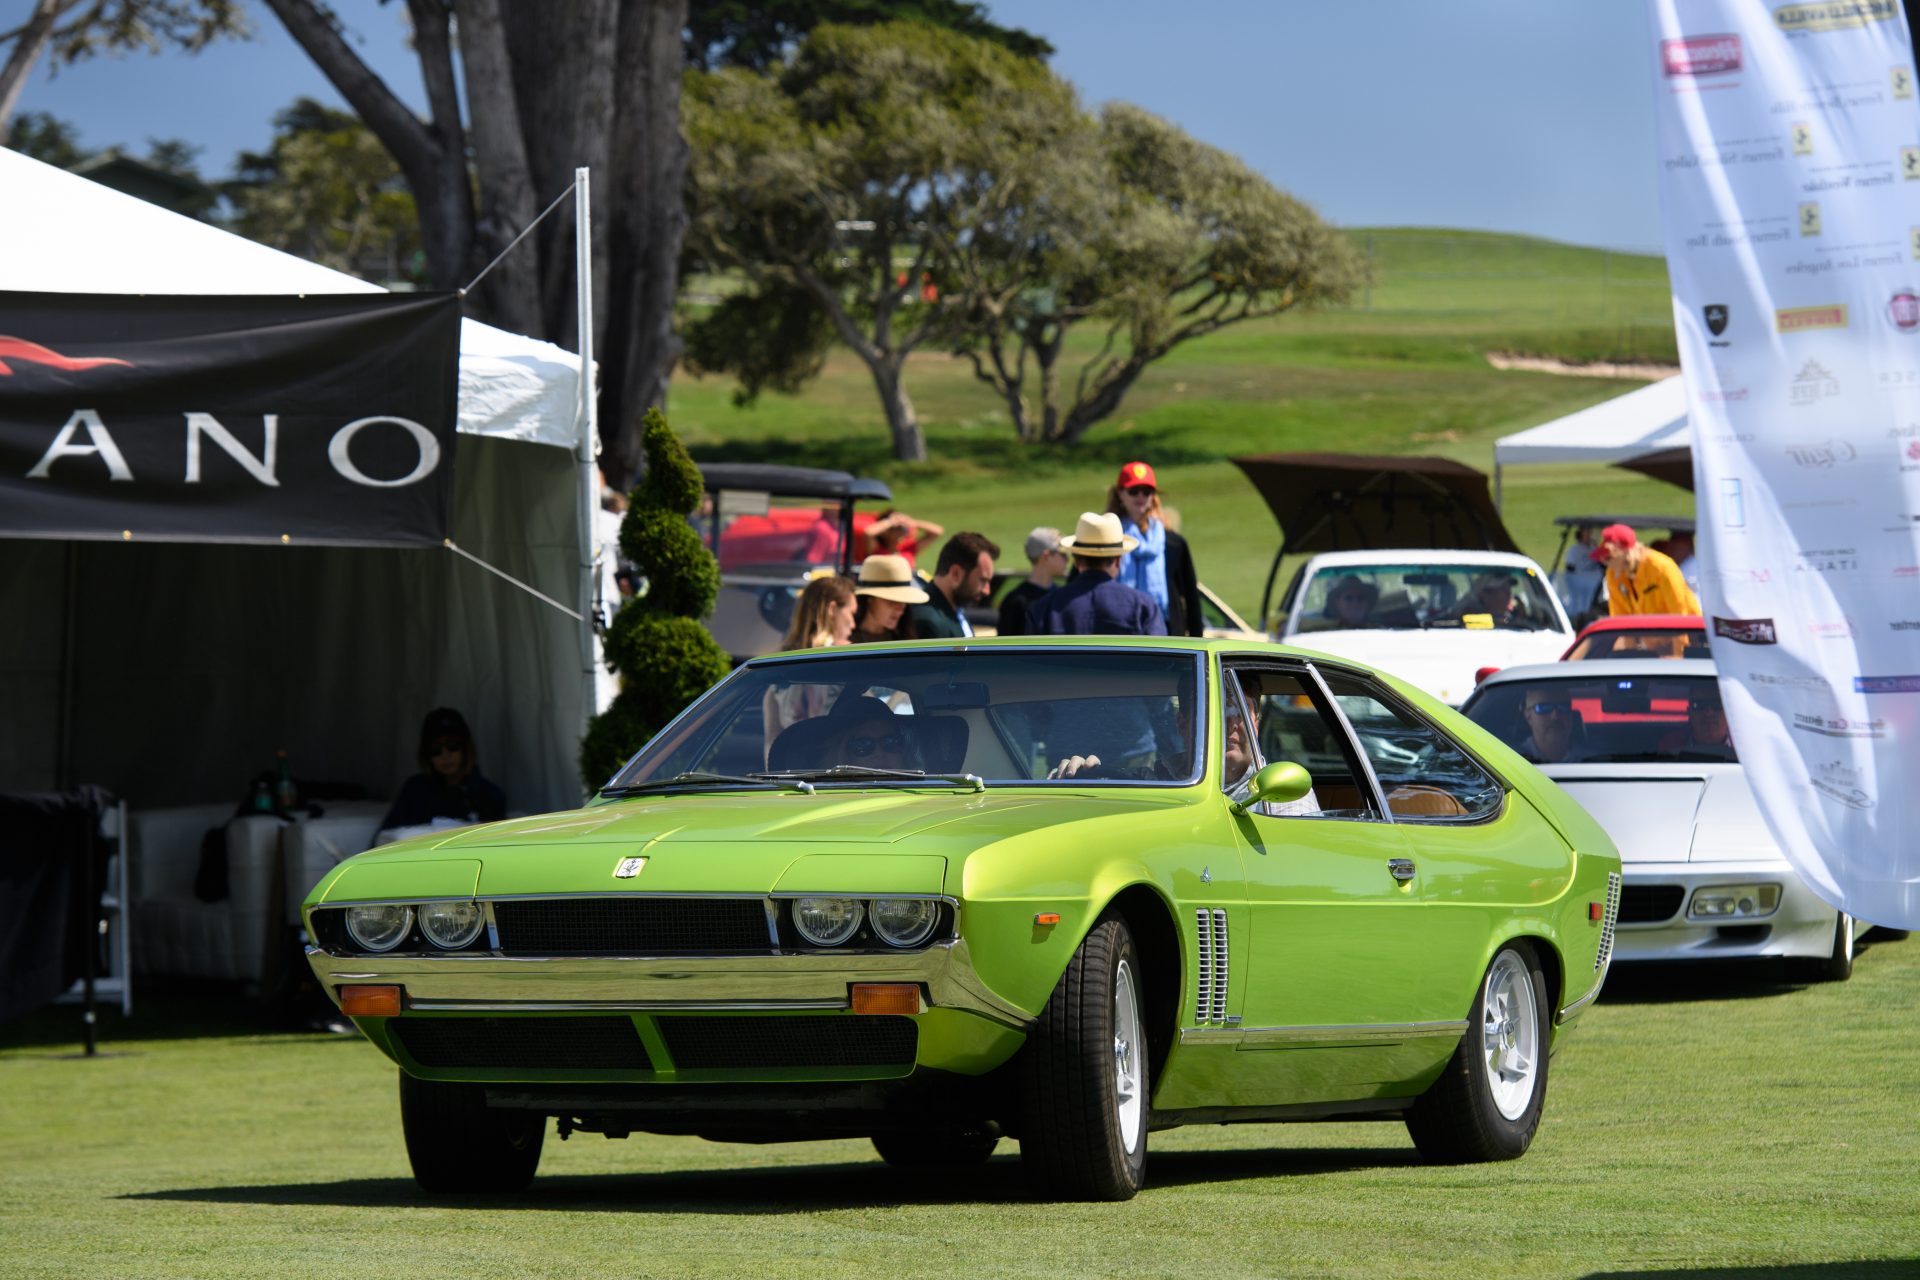 1st place Iso & Bizzarrini: 1974 Iso Lele owned by Mike Clarke from El Dorado Hills, CA